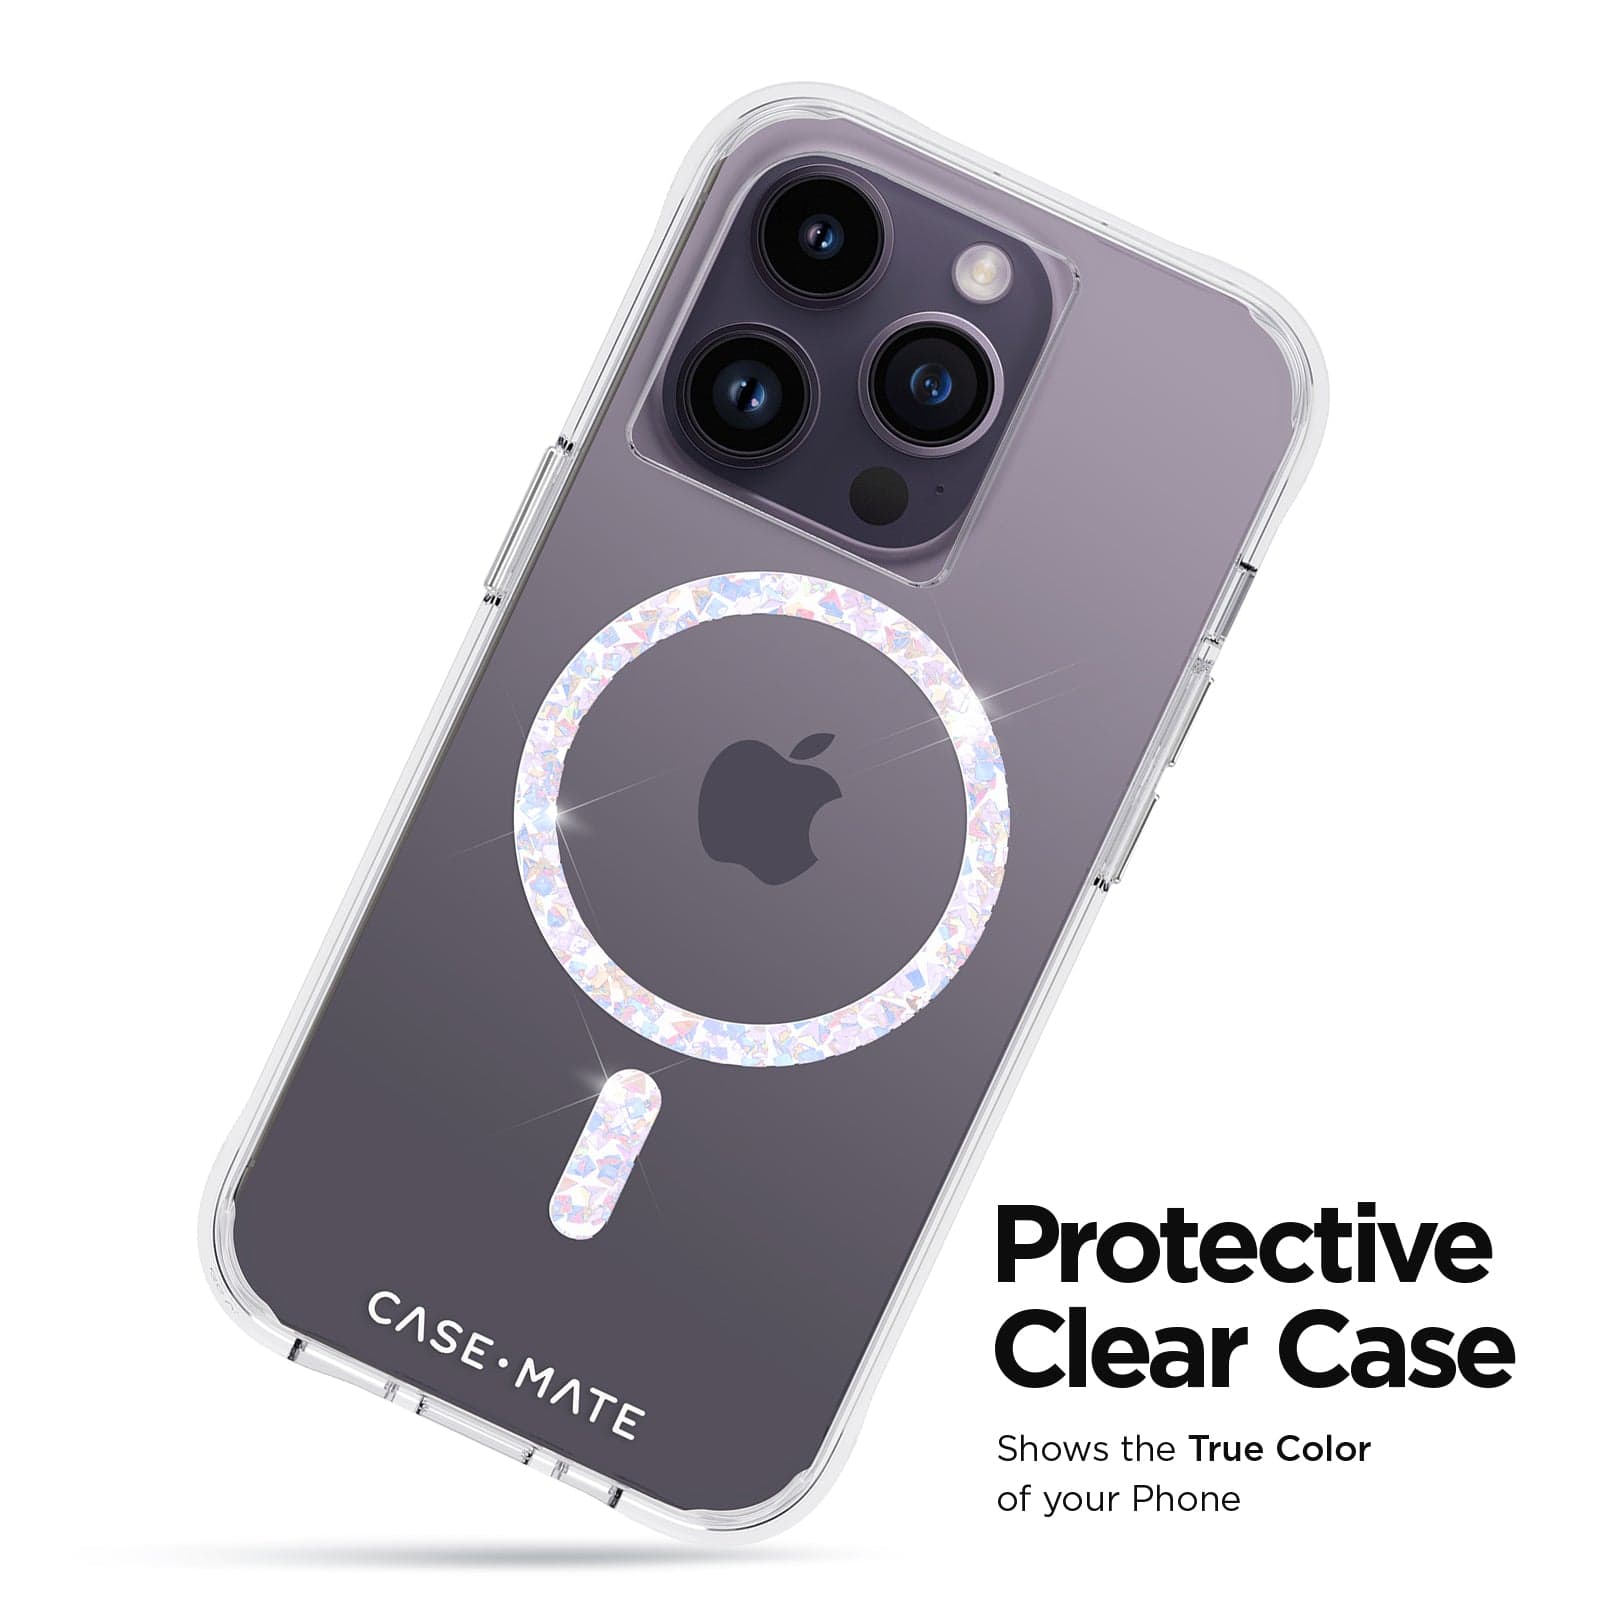 PROTECTIVE CLEAR CASE. SHOWS THE TRUE COLOR OF YOUR PHONE. 